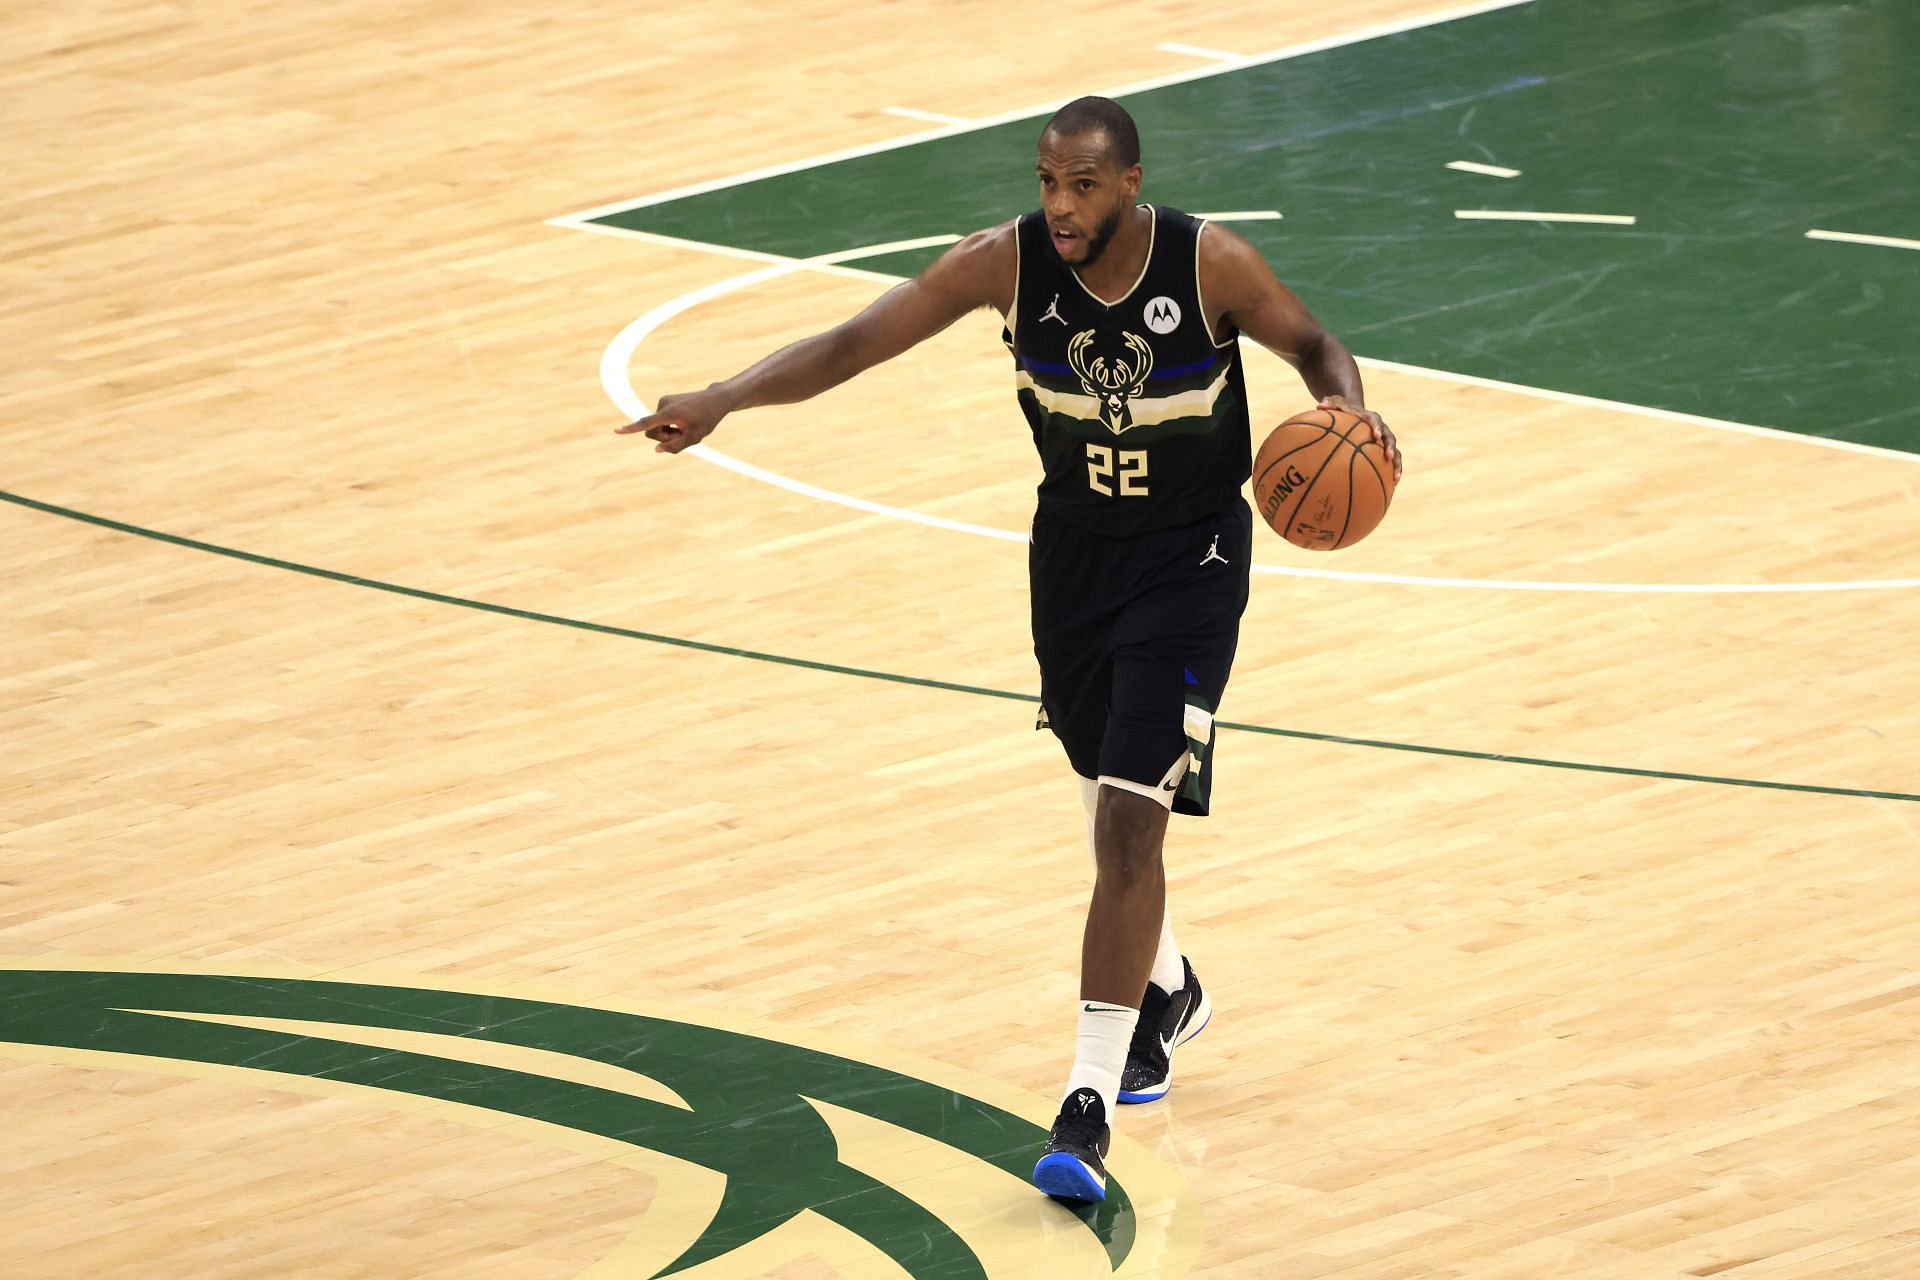 Khris Middleton #22 of the Milwaukee Bucks brings the ball up court against the Phoenix Suns during the second half in Game Six of the NBA Finals at Fiserv Forum on July 20, 2021 in Milwaukee, Wisconsin.